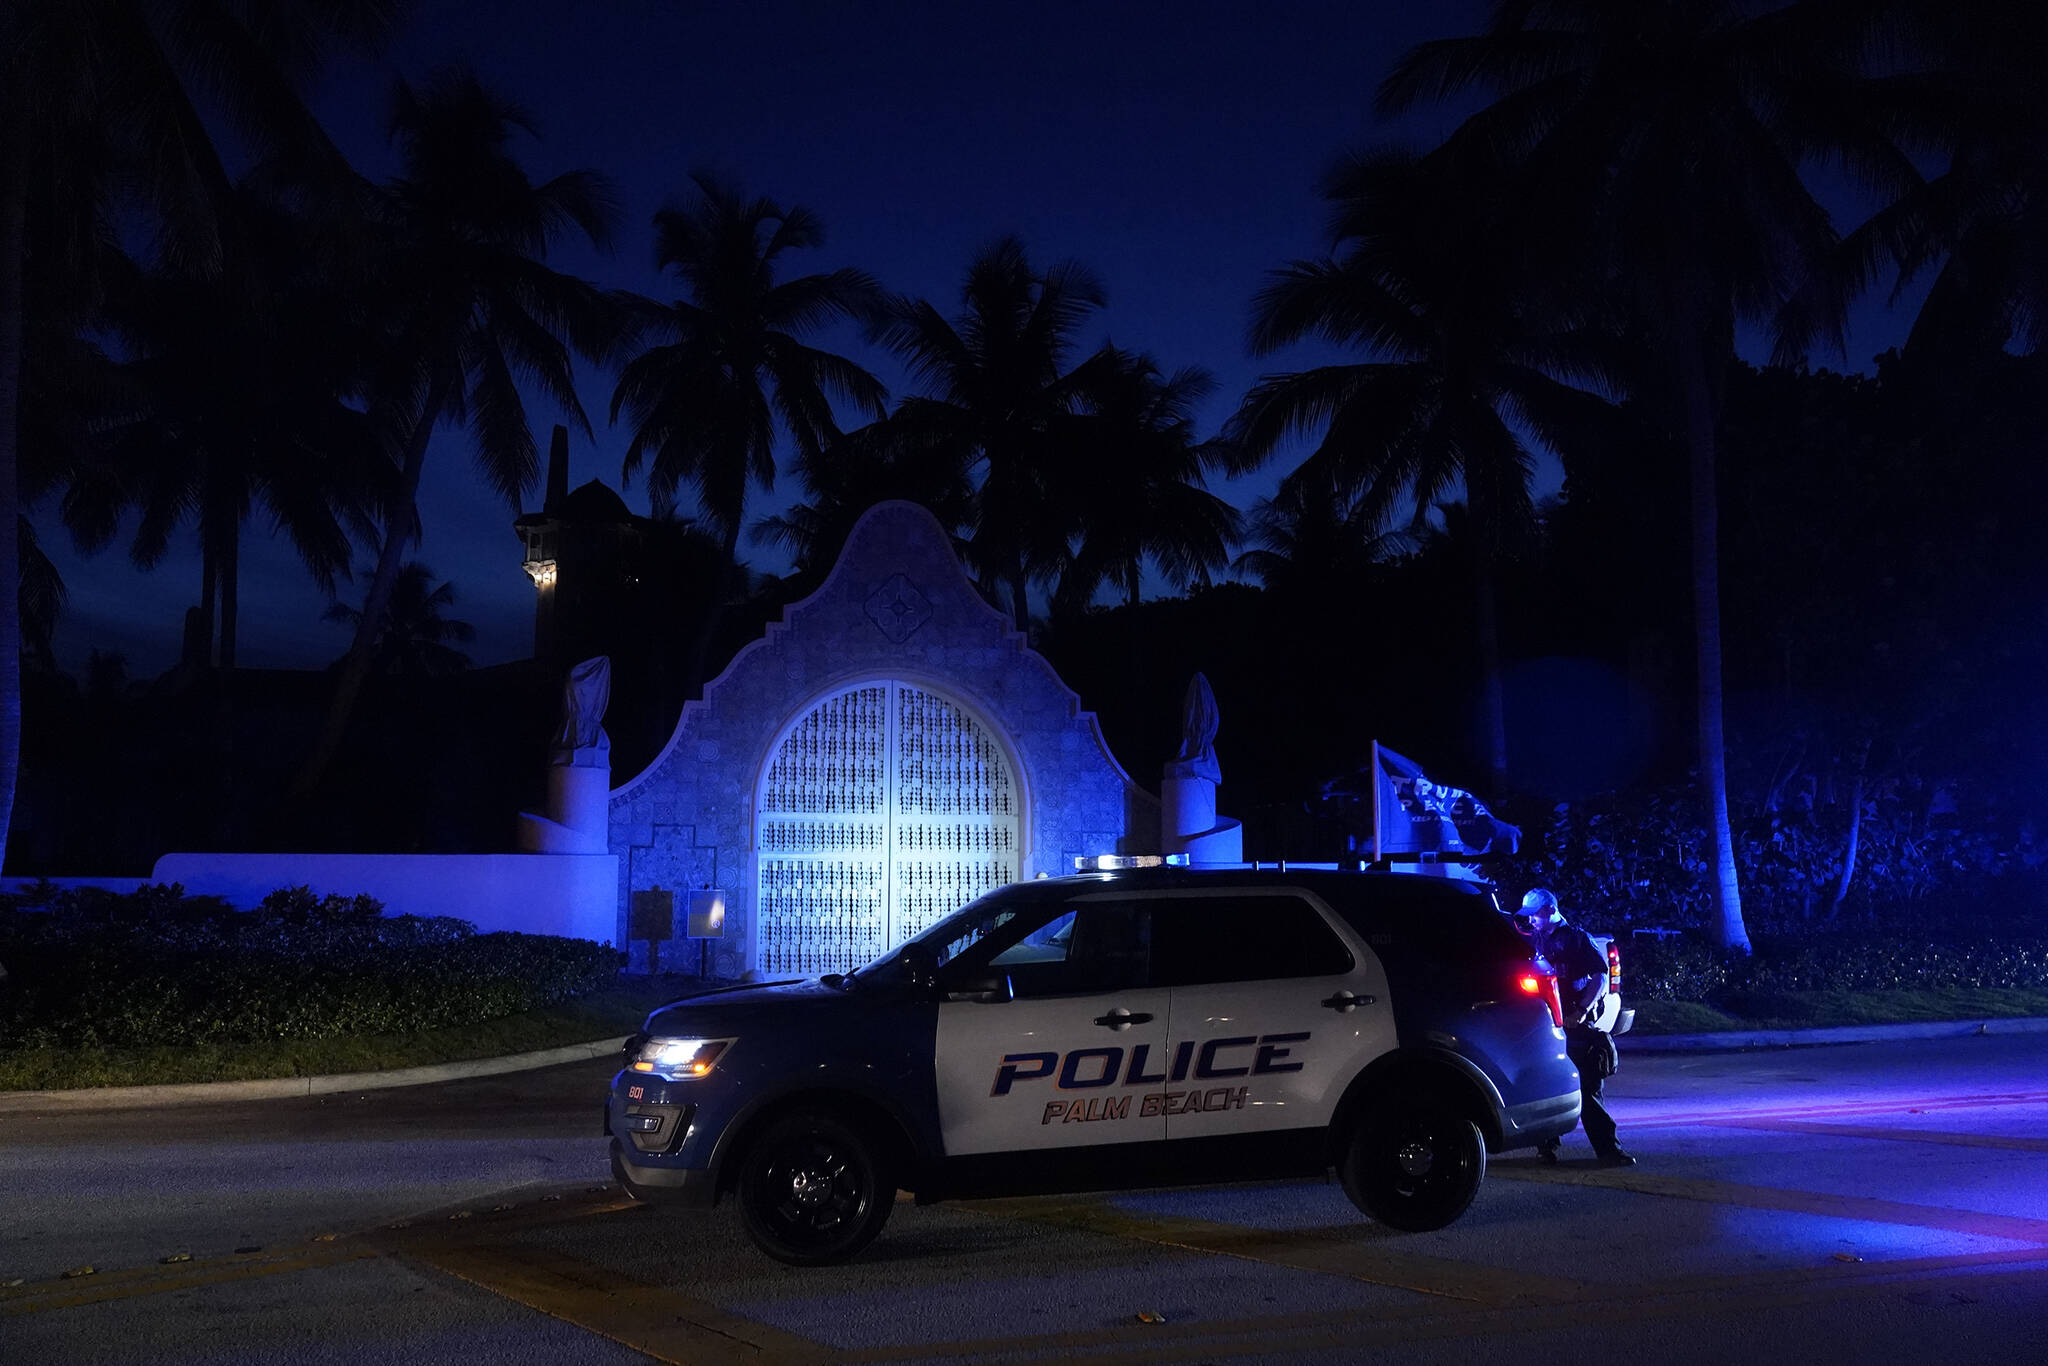 Police stand outside an entrance to former President Donald Trump's Mar-a-Lago estate, Monday, Aug. 8, 2022, in Palm Beach, Fla. Trump said in a lengthy statement that the FBI was conducting a search of his Mar-a-Lago estate and asserted that agents had broken open a safe. (AP Photo / Wilfredo Lee)